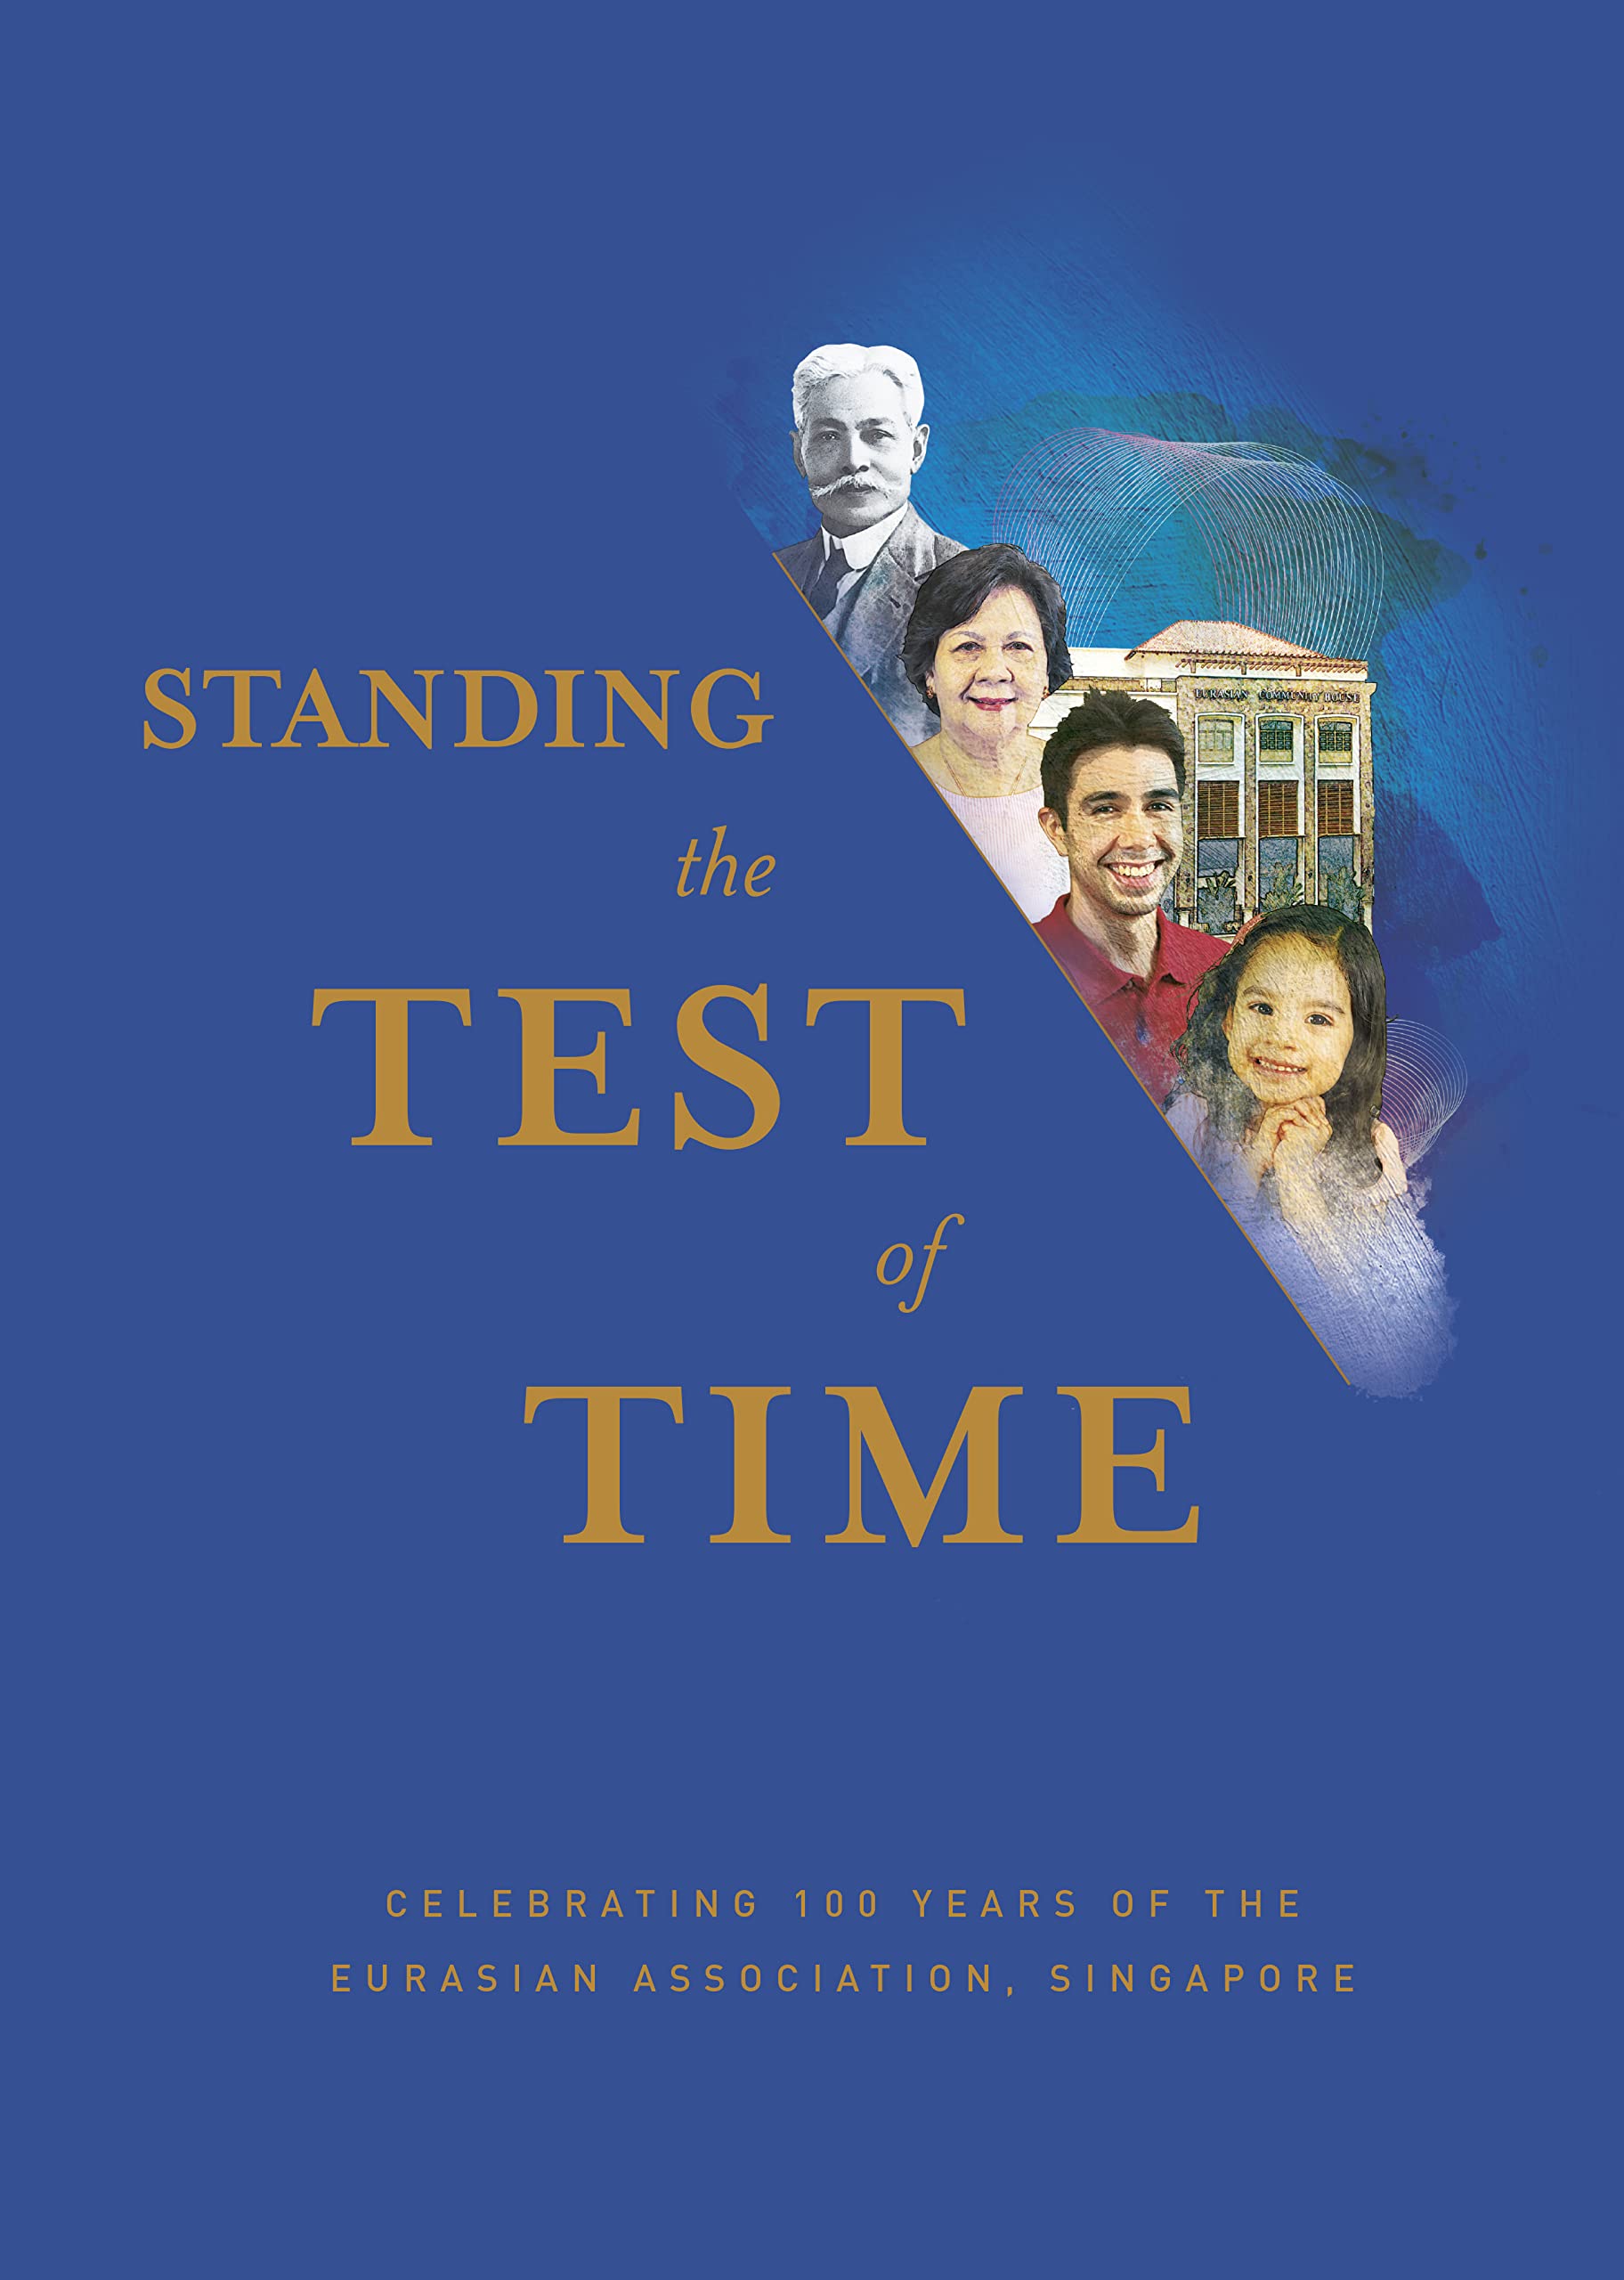 Standing the Test of Time: Celebrating 100 Years of the Eurasian Association, Singapore